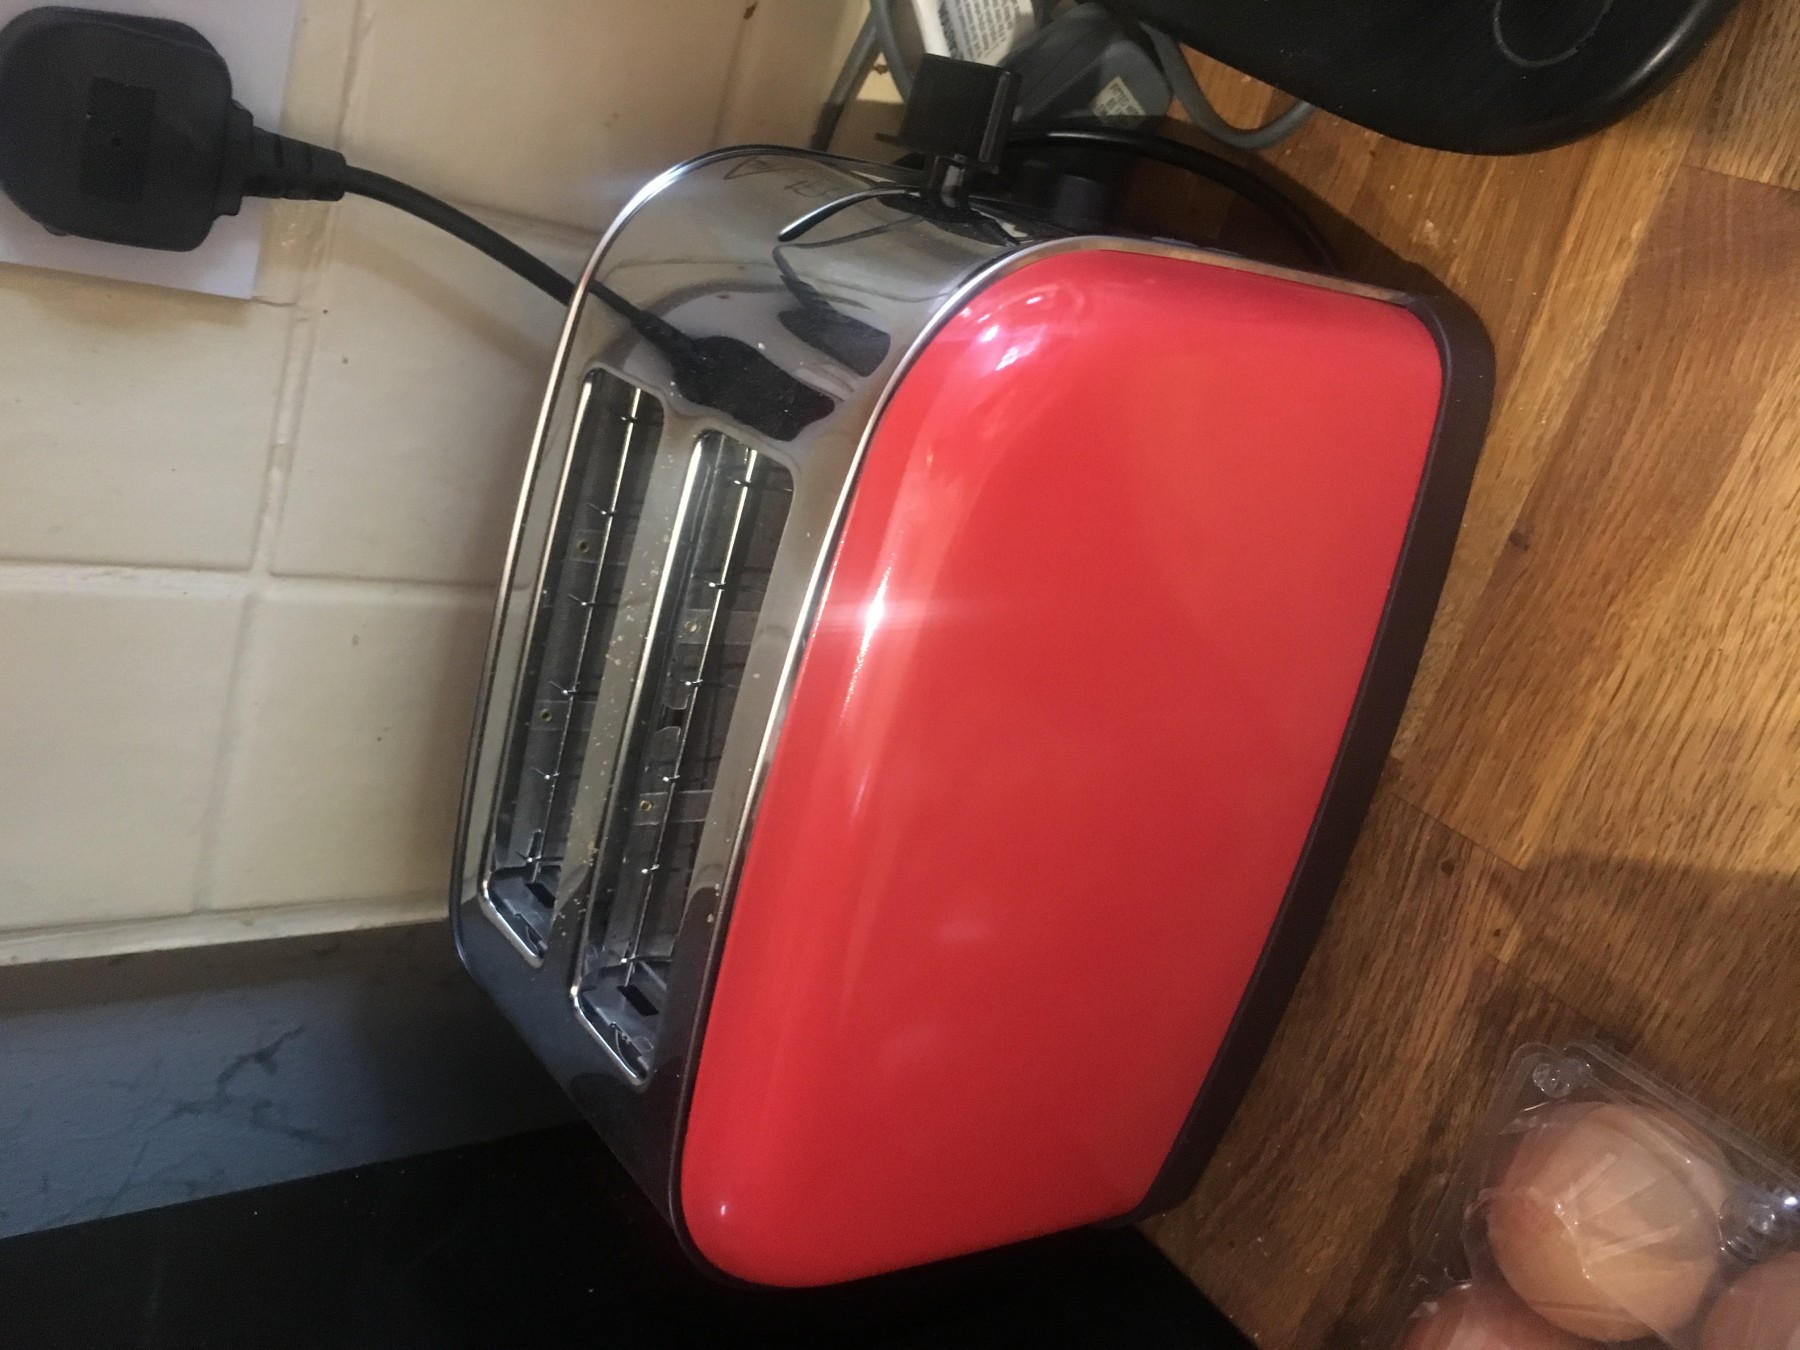 easy to use toaster